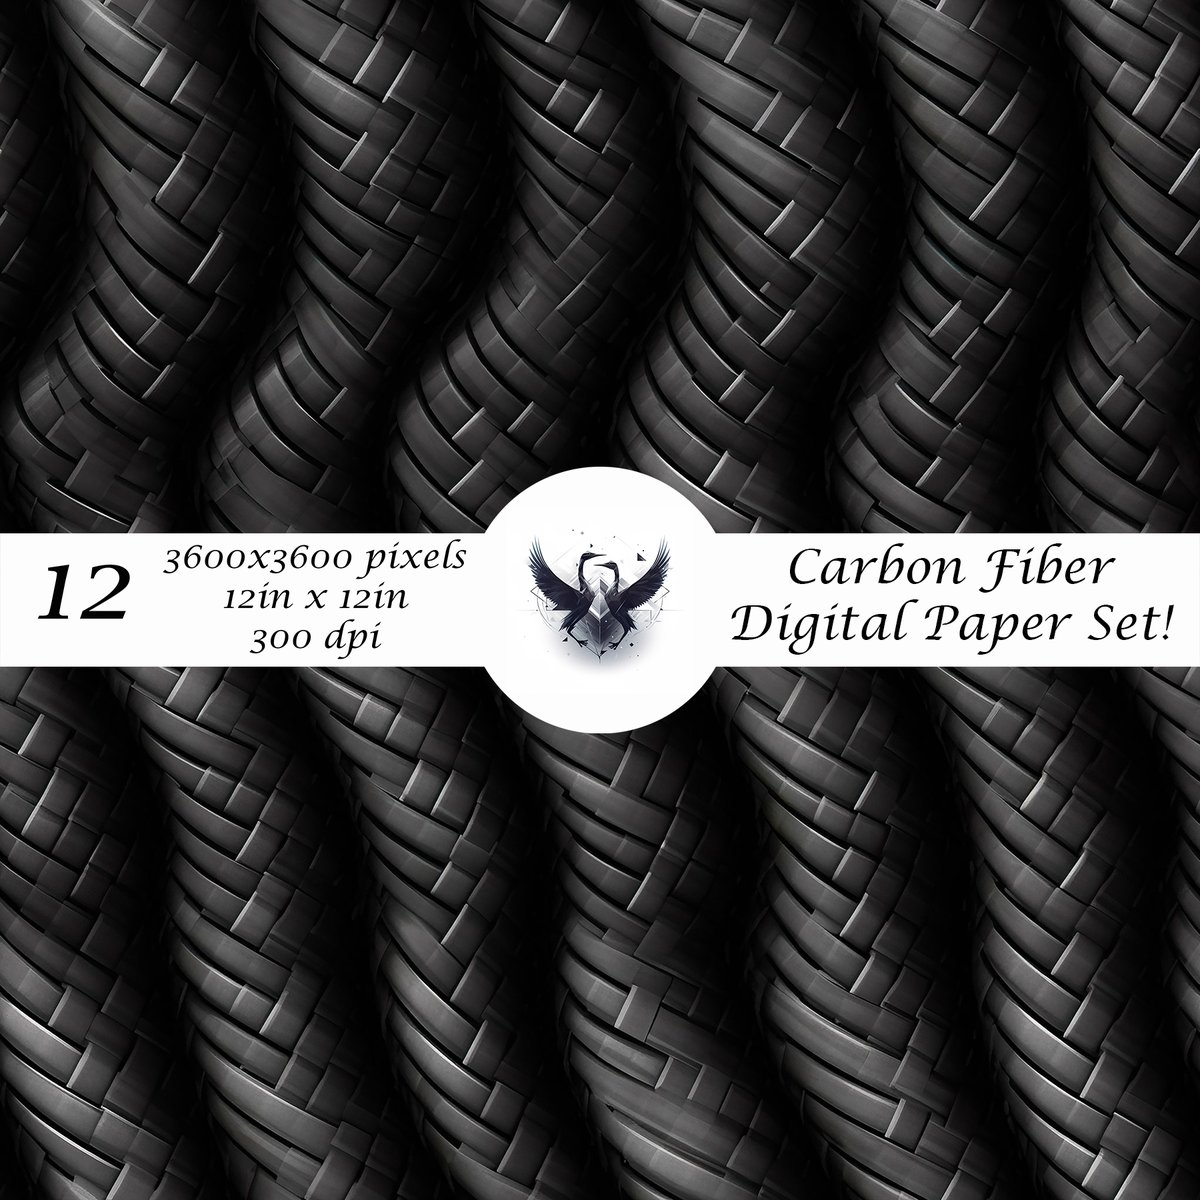 High tech carbon fiber #digitalpaper for digital crafting or as an add on to your #scrapbook, #schoolproject, #journals, #partyinvitations, you name it!
digitalgeese.biz/product/carbon…